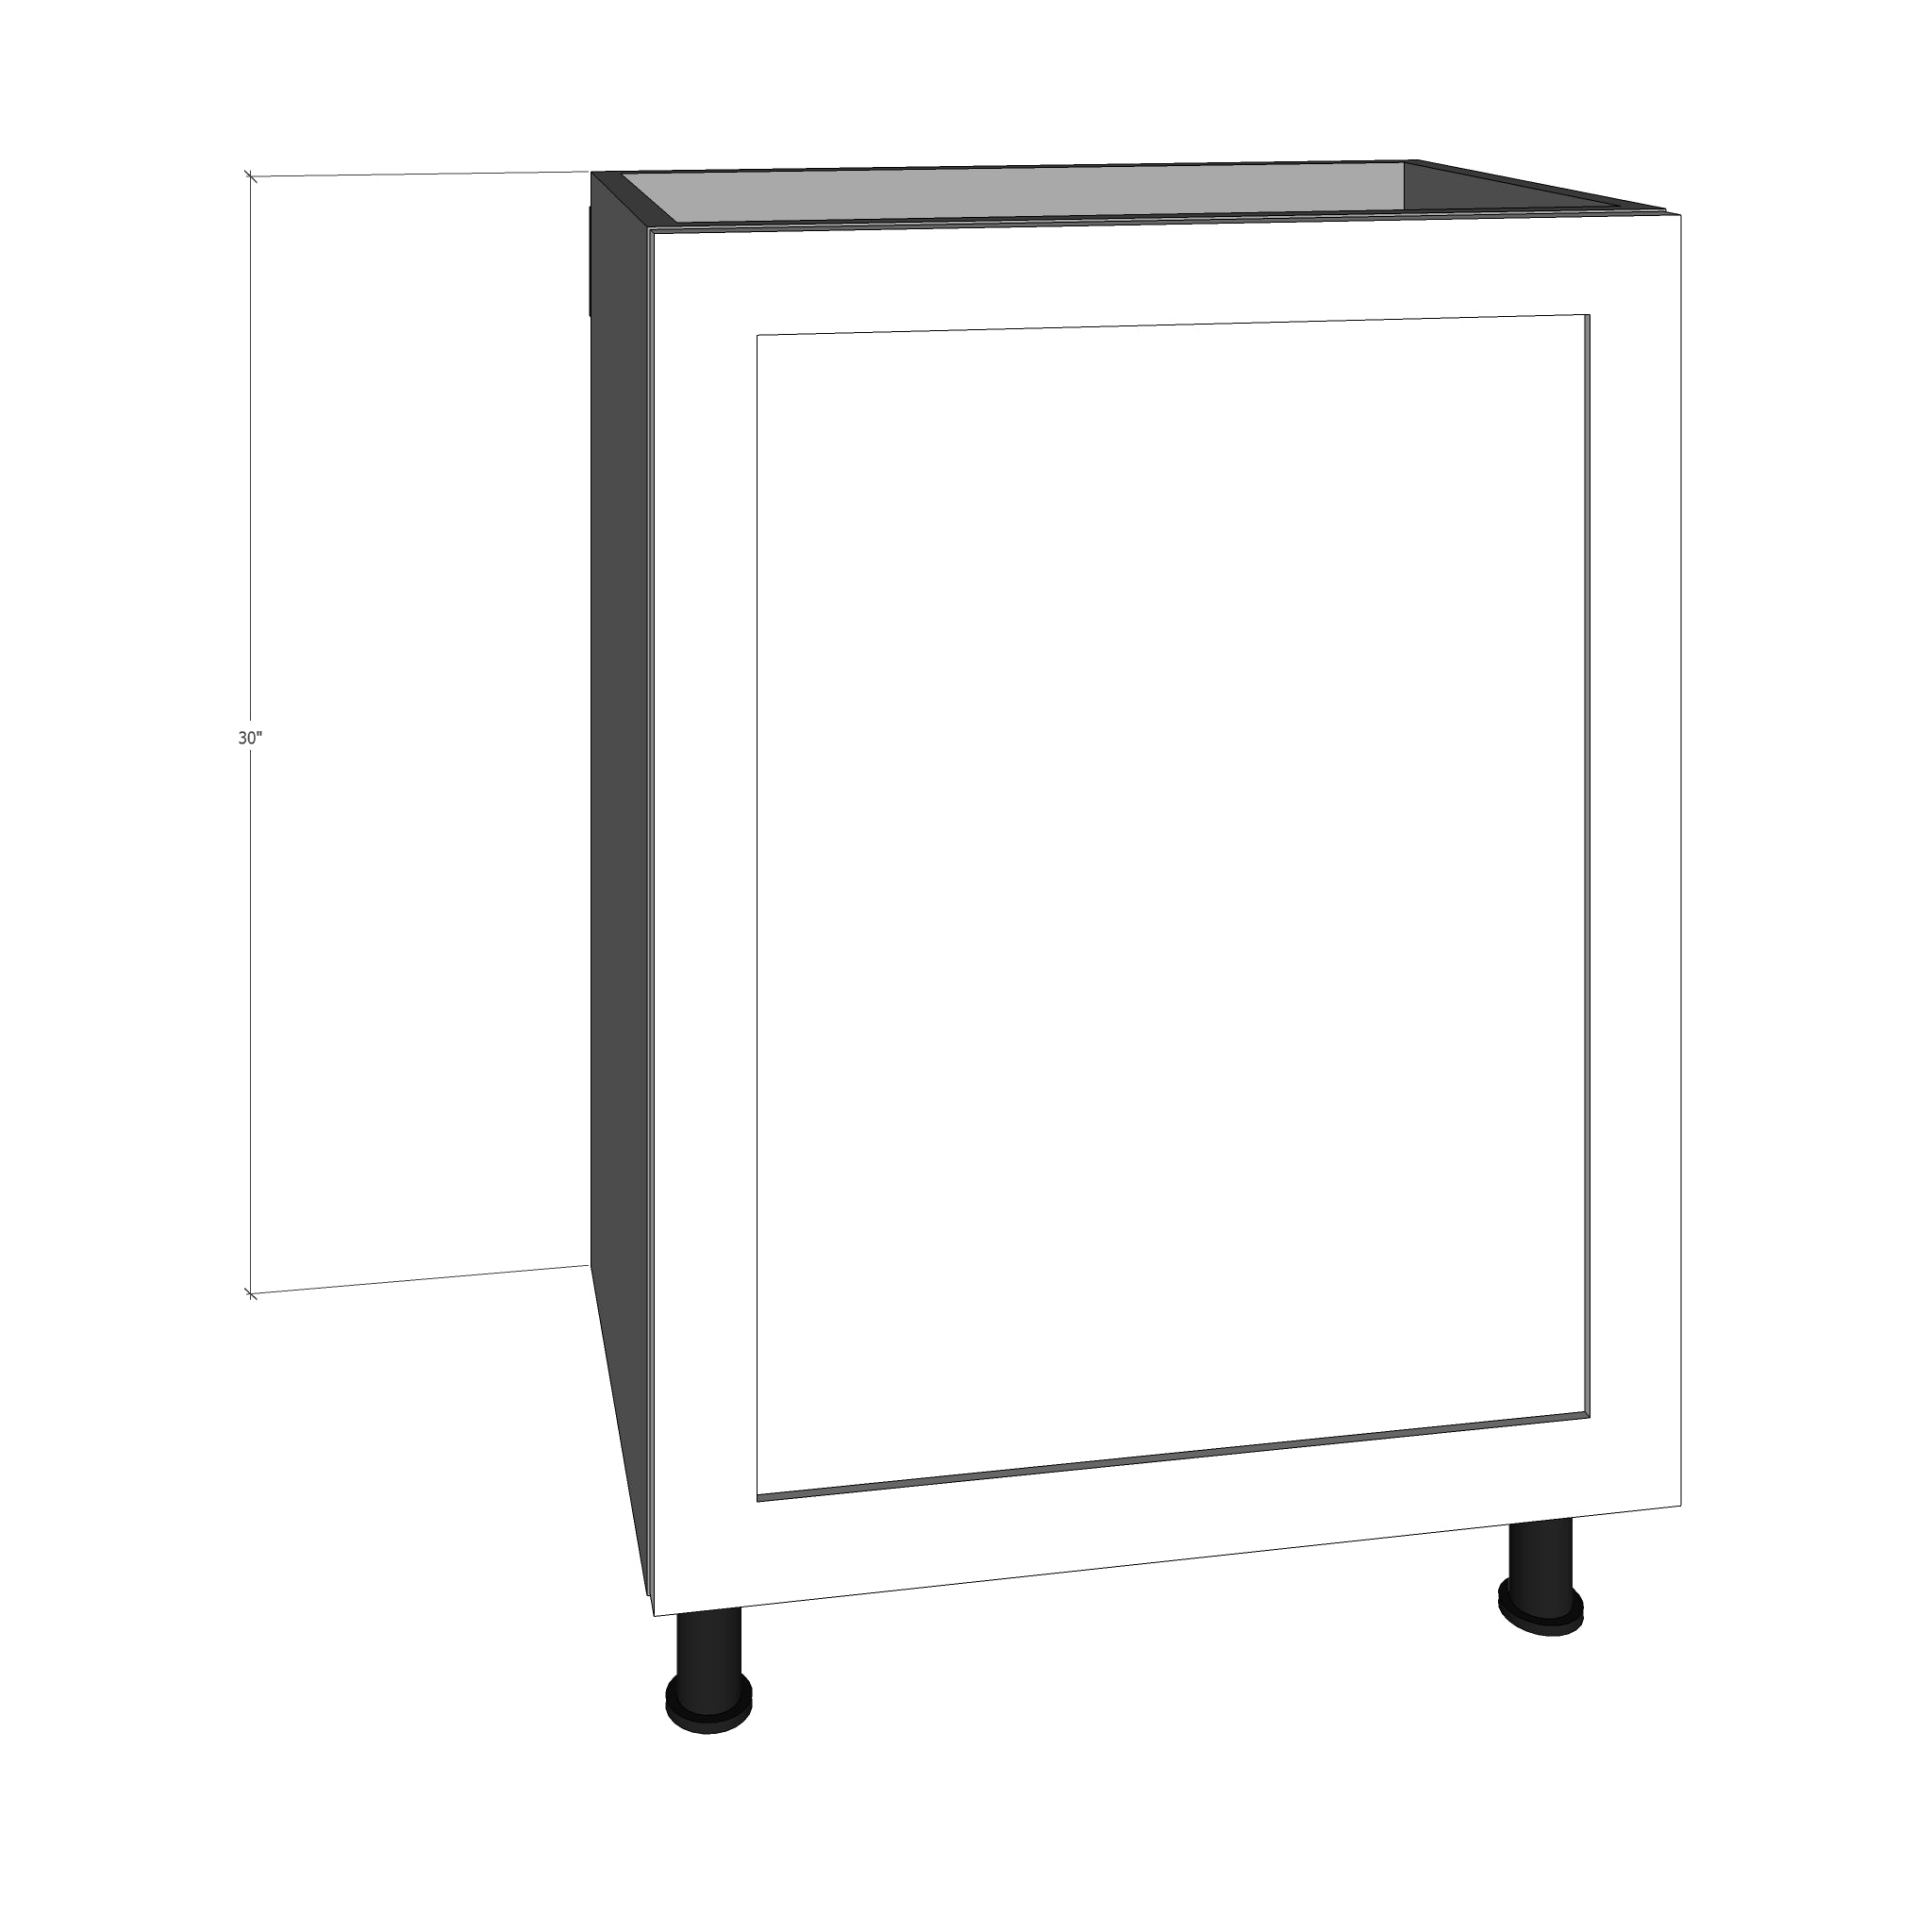 Bpo 15 Pullout Door For 15 W Ikea Sektion Base Cabinet Allstyle